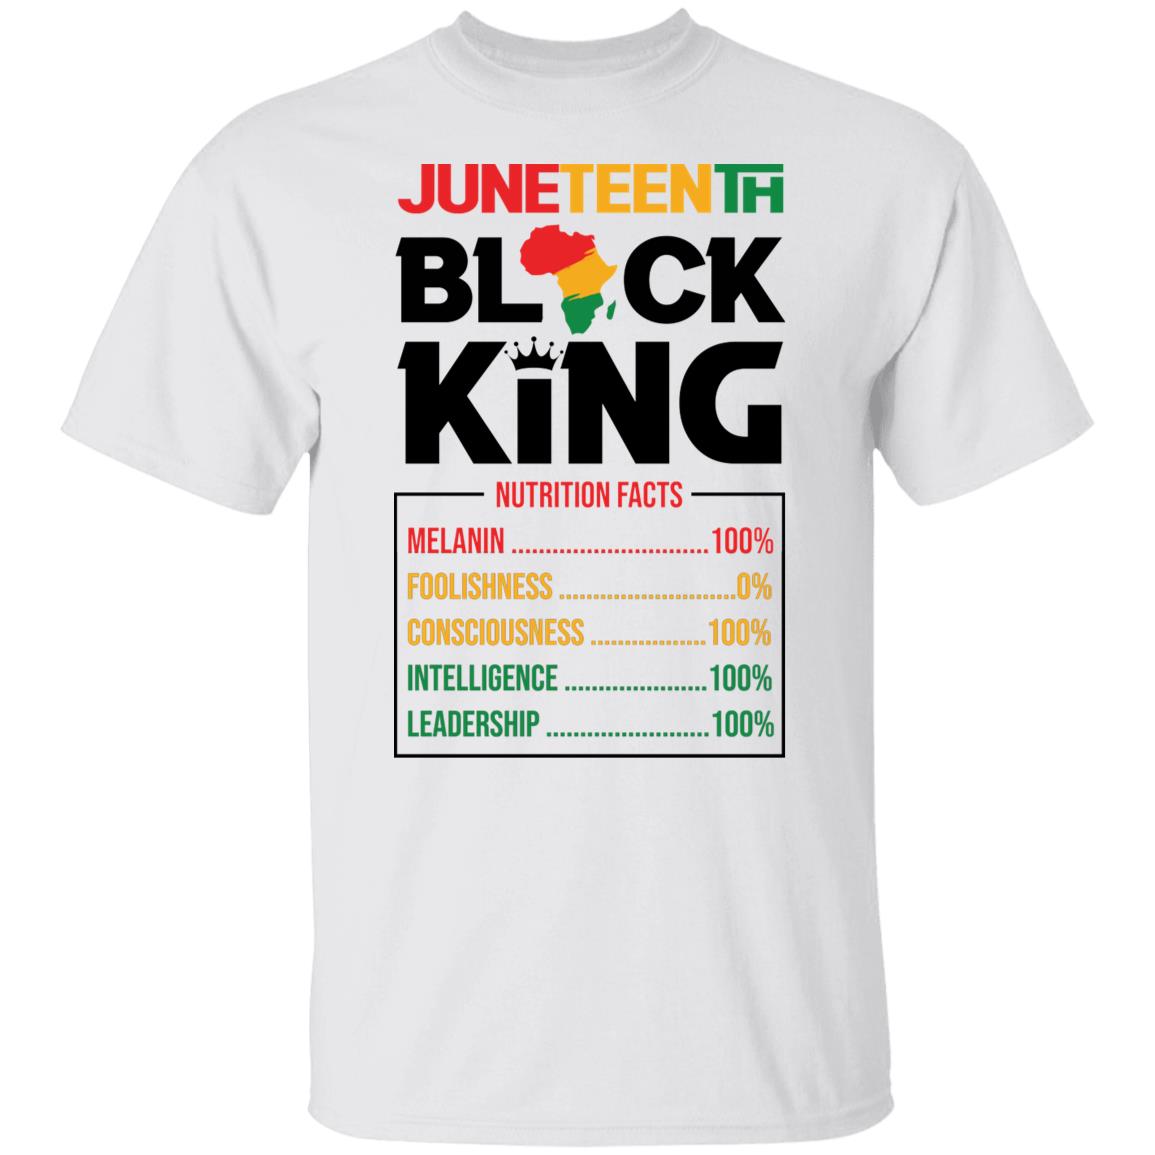 Juneteenth Black King Nutrition Facts T-shirt Apparel Gearment Unisex Tee White S